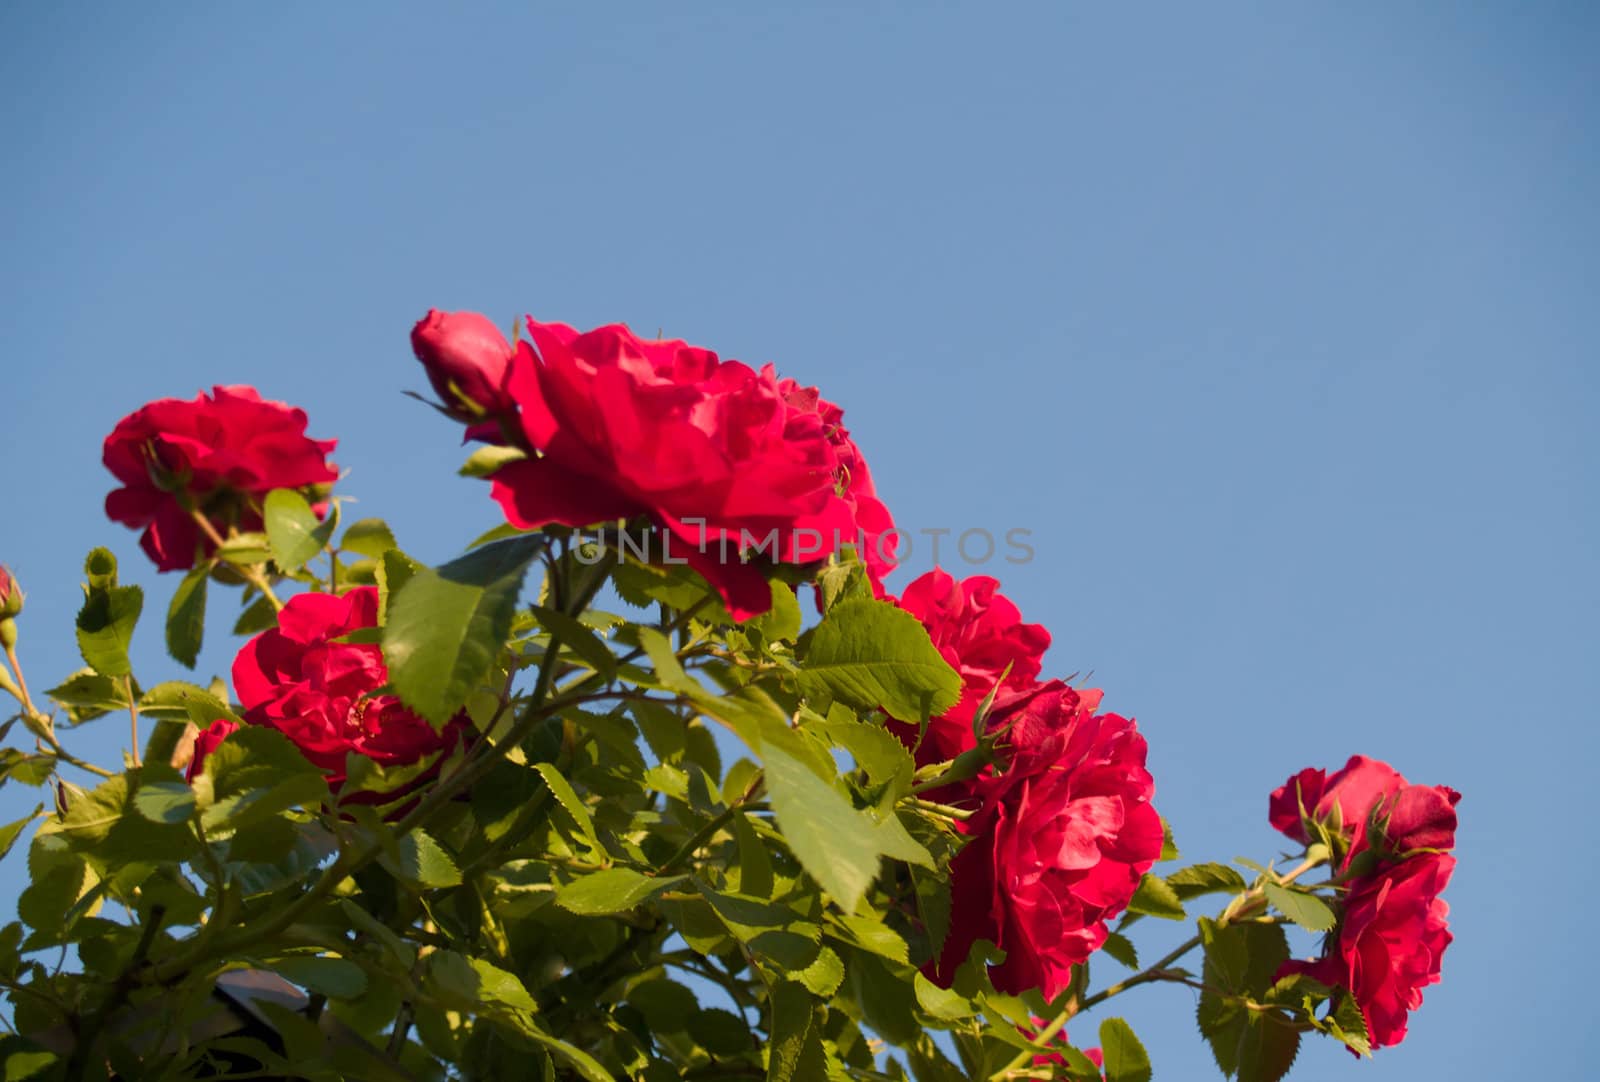 Bouquet of red garden roses on sky background. Illuminated by sun. Focus on right flowers